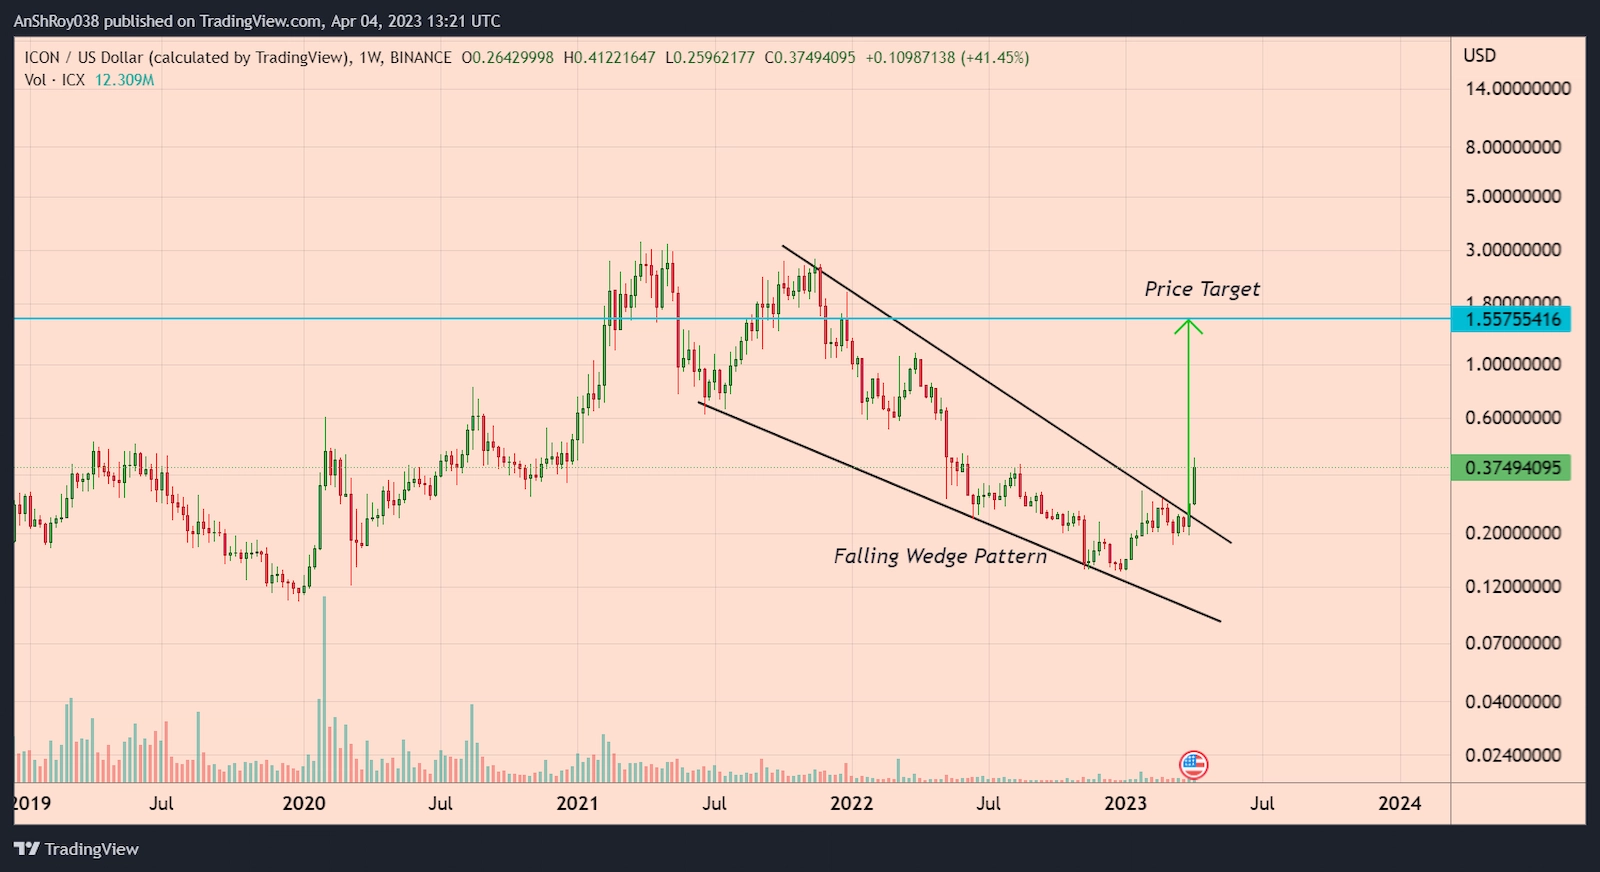 ICX price broke out of a falling wedge pattern with a 316% price target